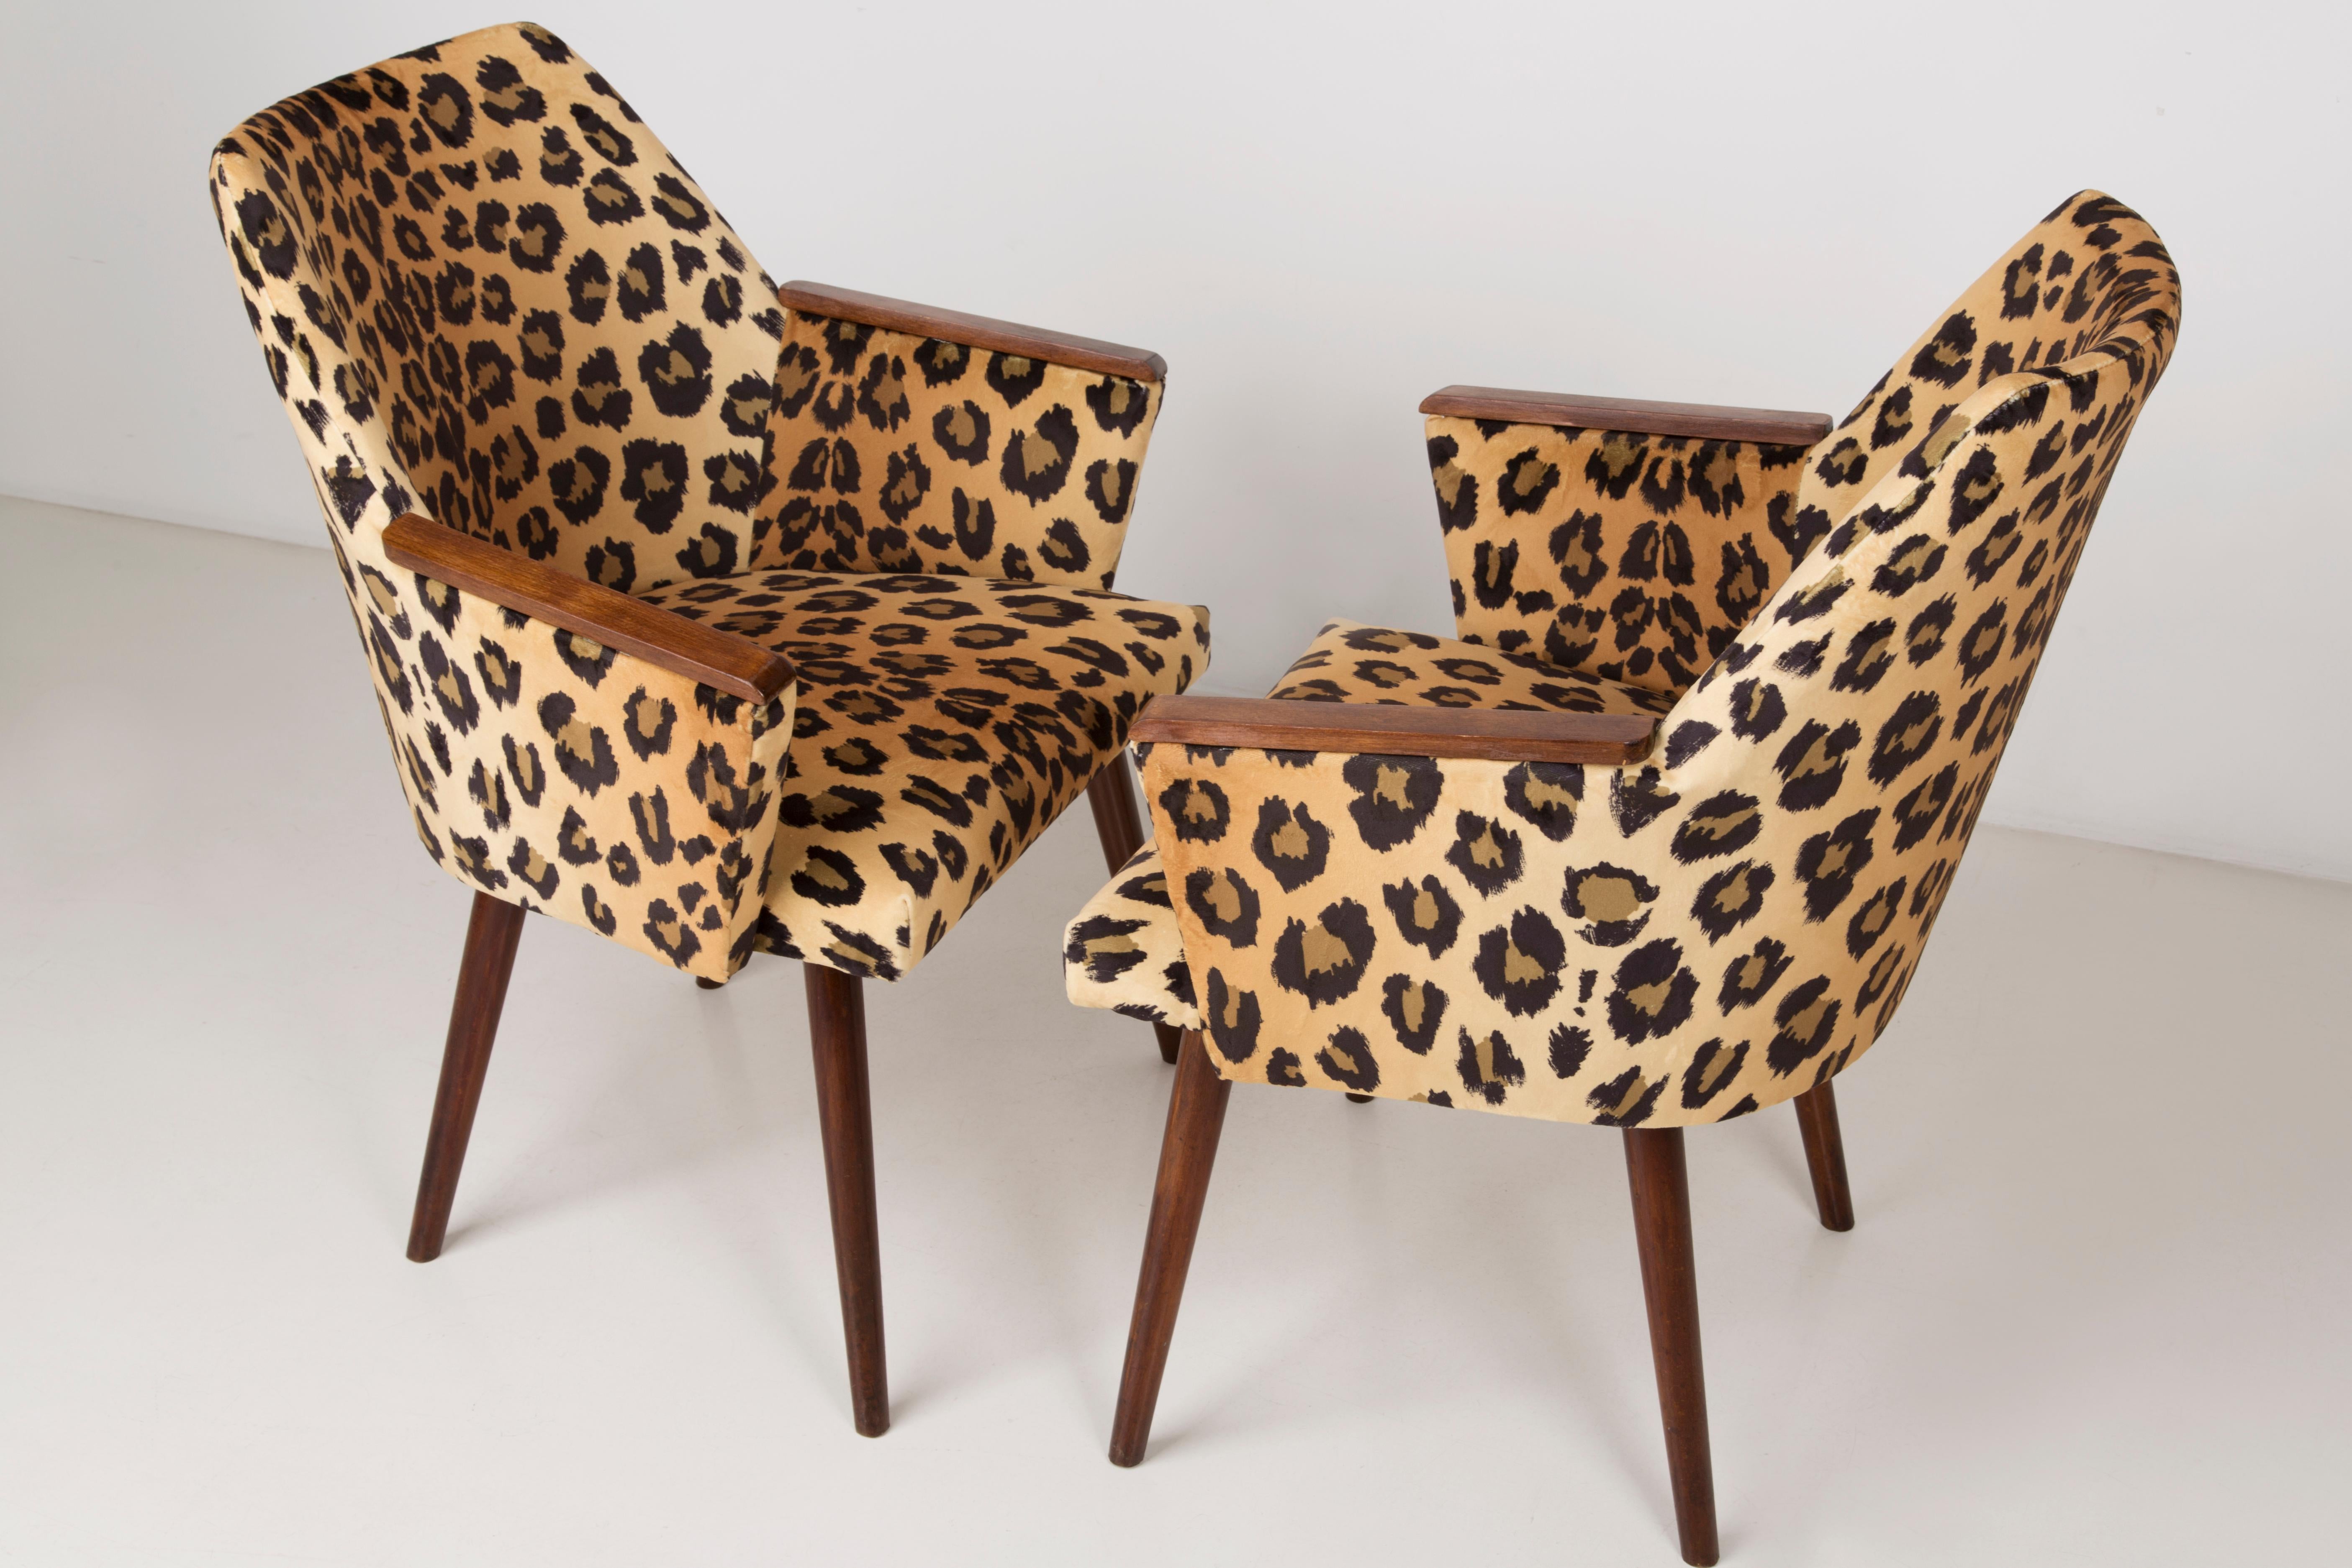 20th Century Set of Two Mid-Century Modern Leopard Print Chairs, 1960s, Germany